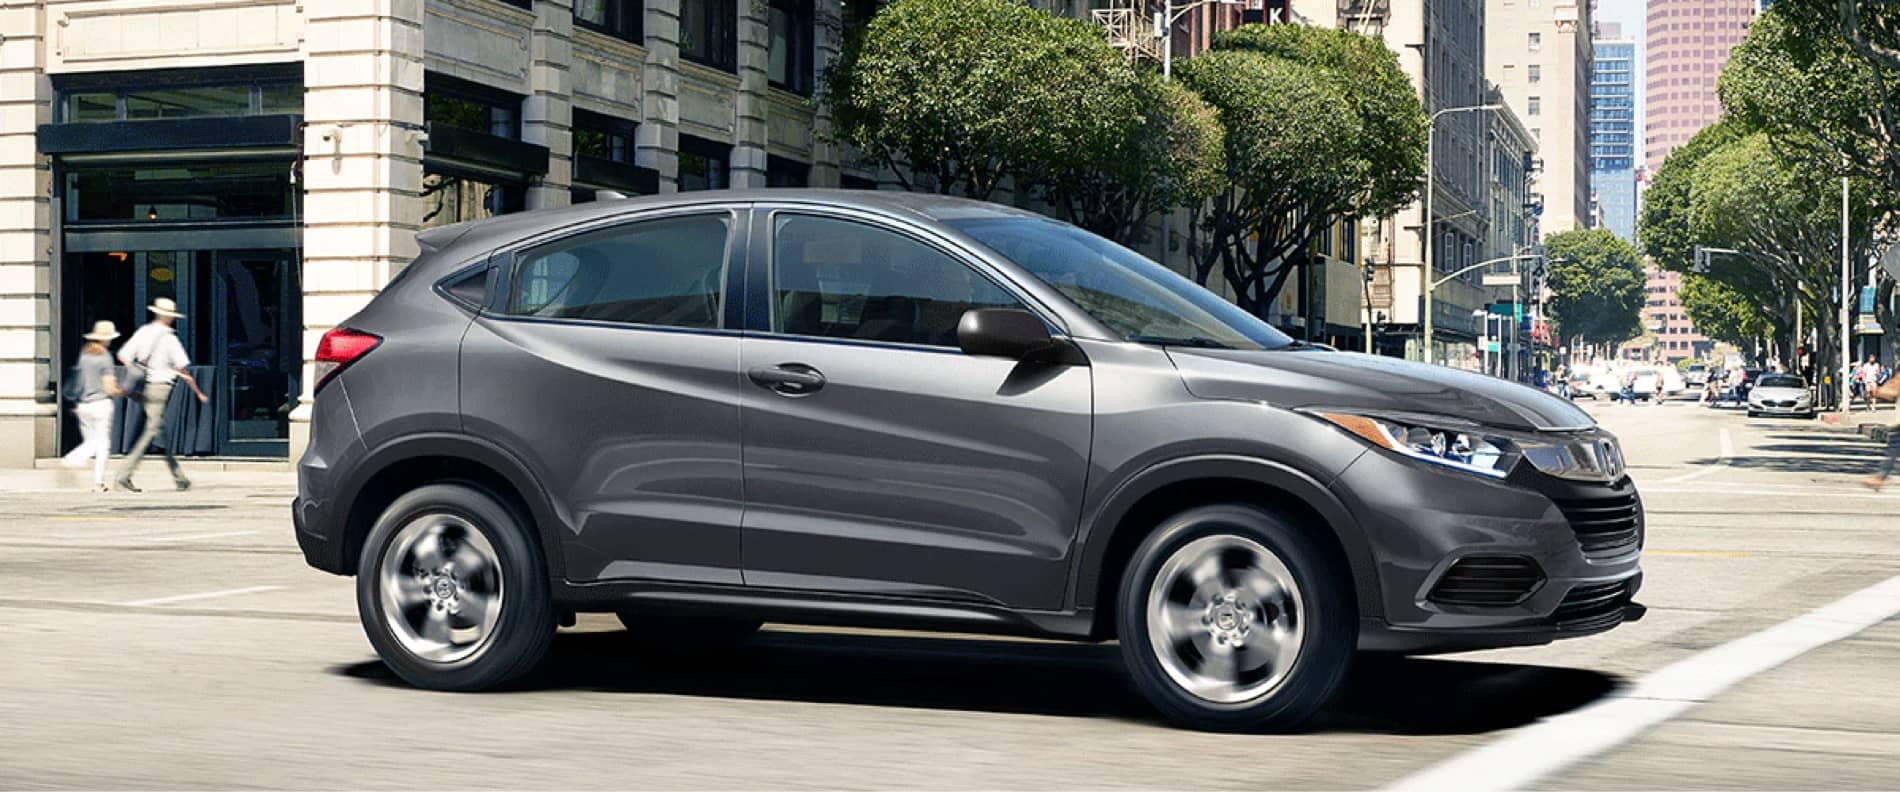 2021 Honda HR-V driving in downtown city streets